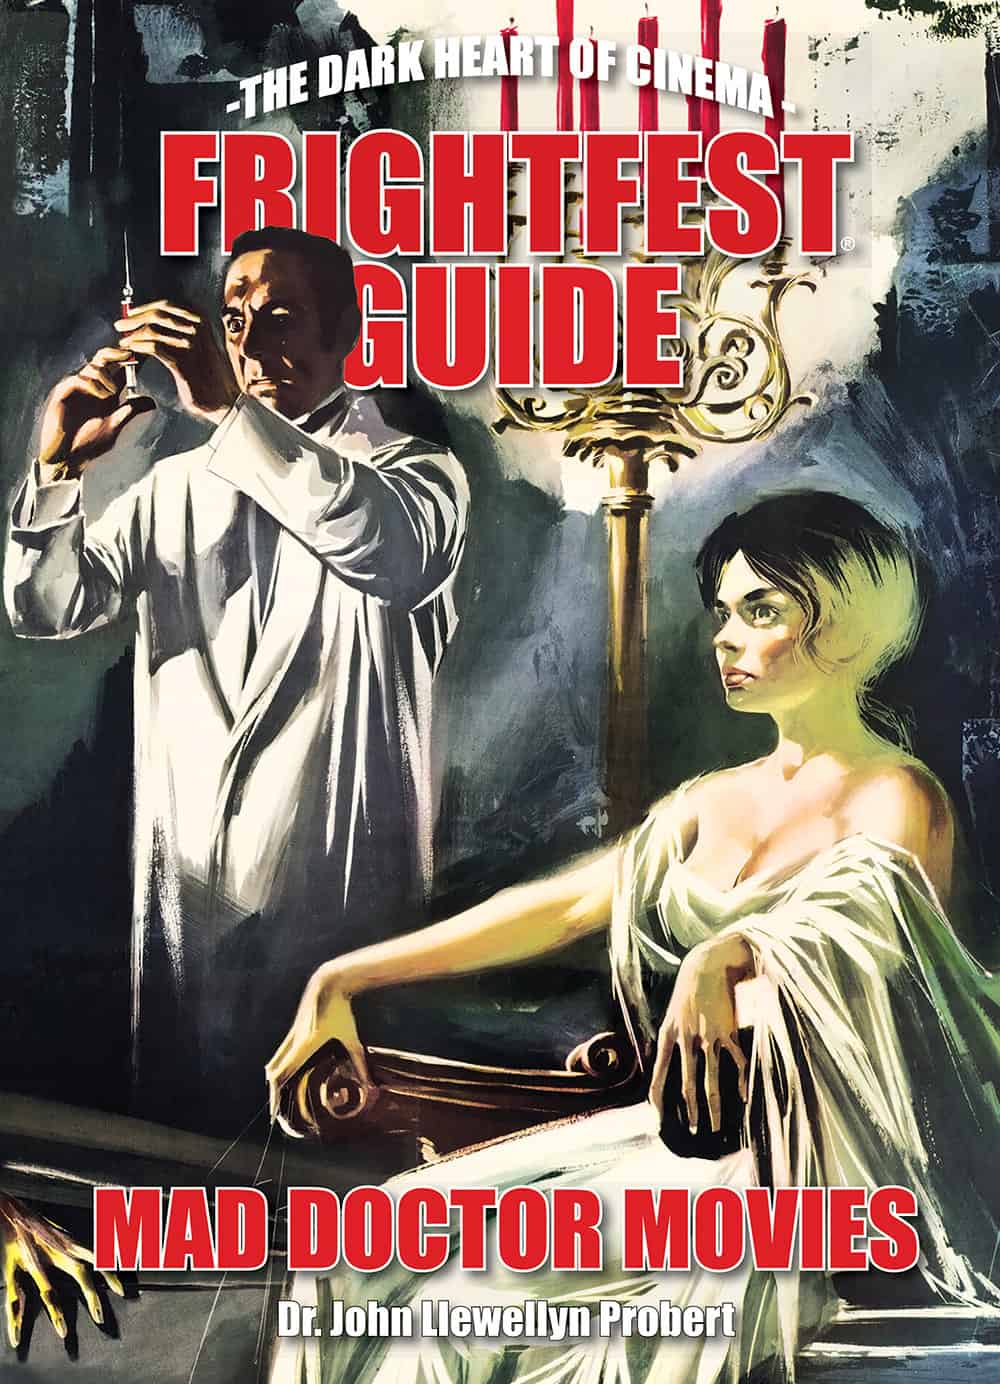 THE FRIGHTFEST GUIDE TO MAD DOCTOR MOVIES Launches in August